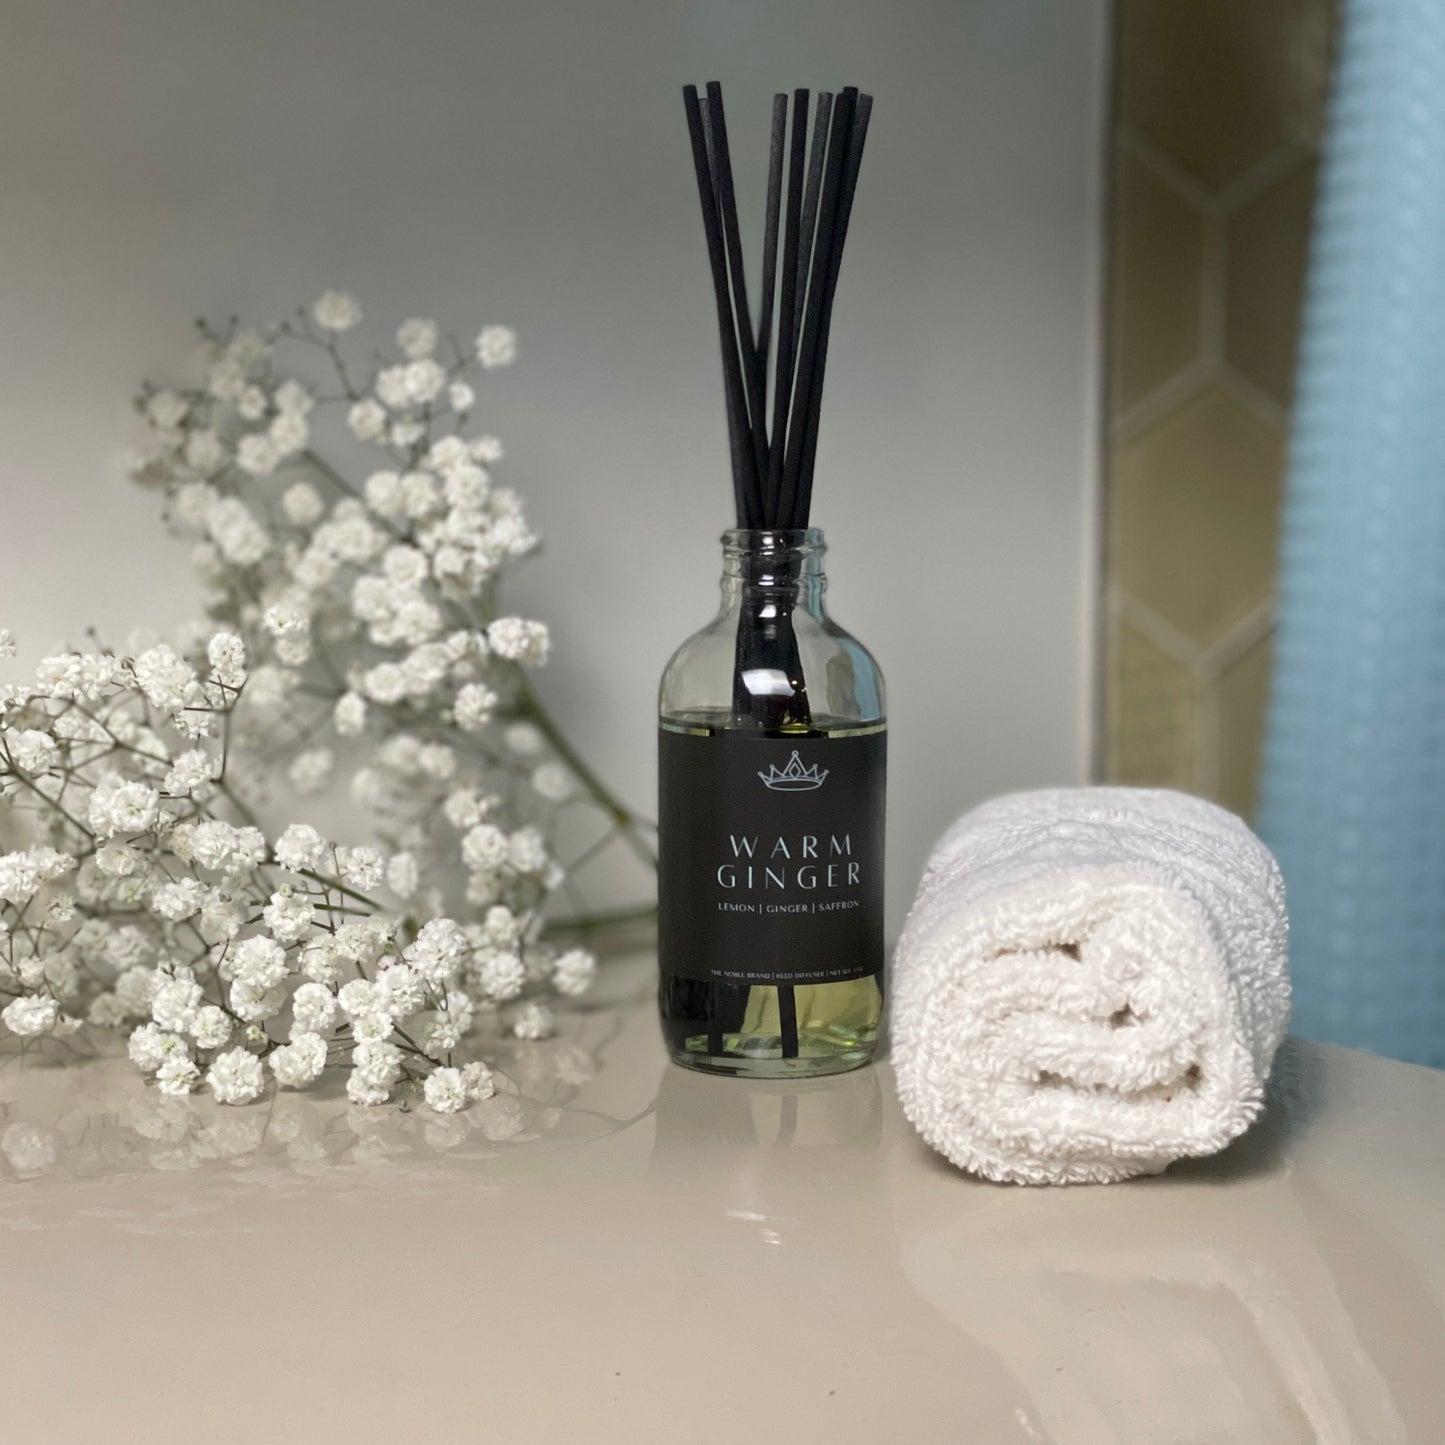 A diffuser bottle of Warm Ginger on a sink counter with white flowers and a washcloth